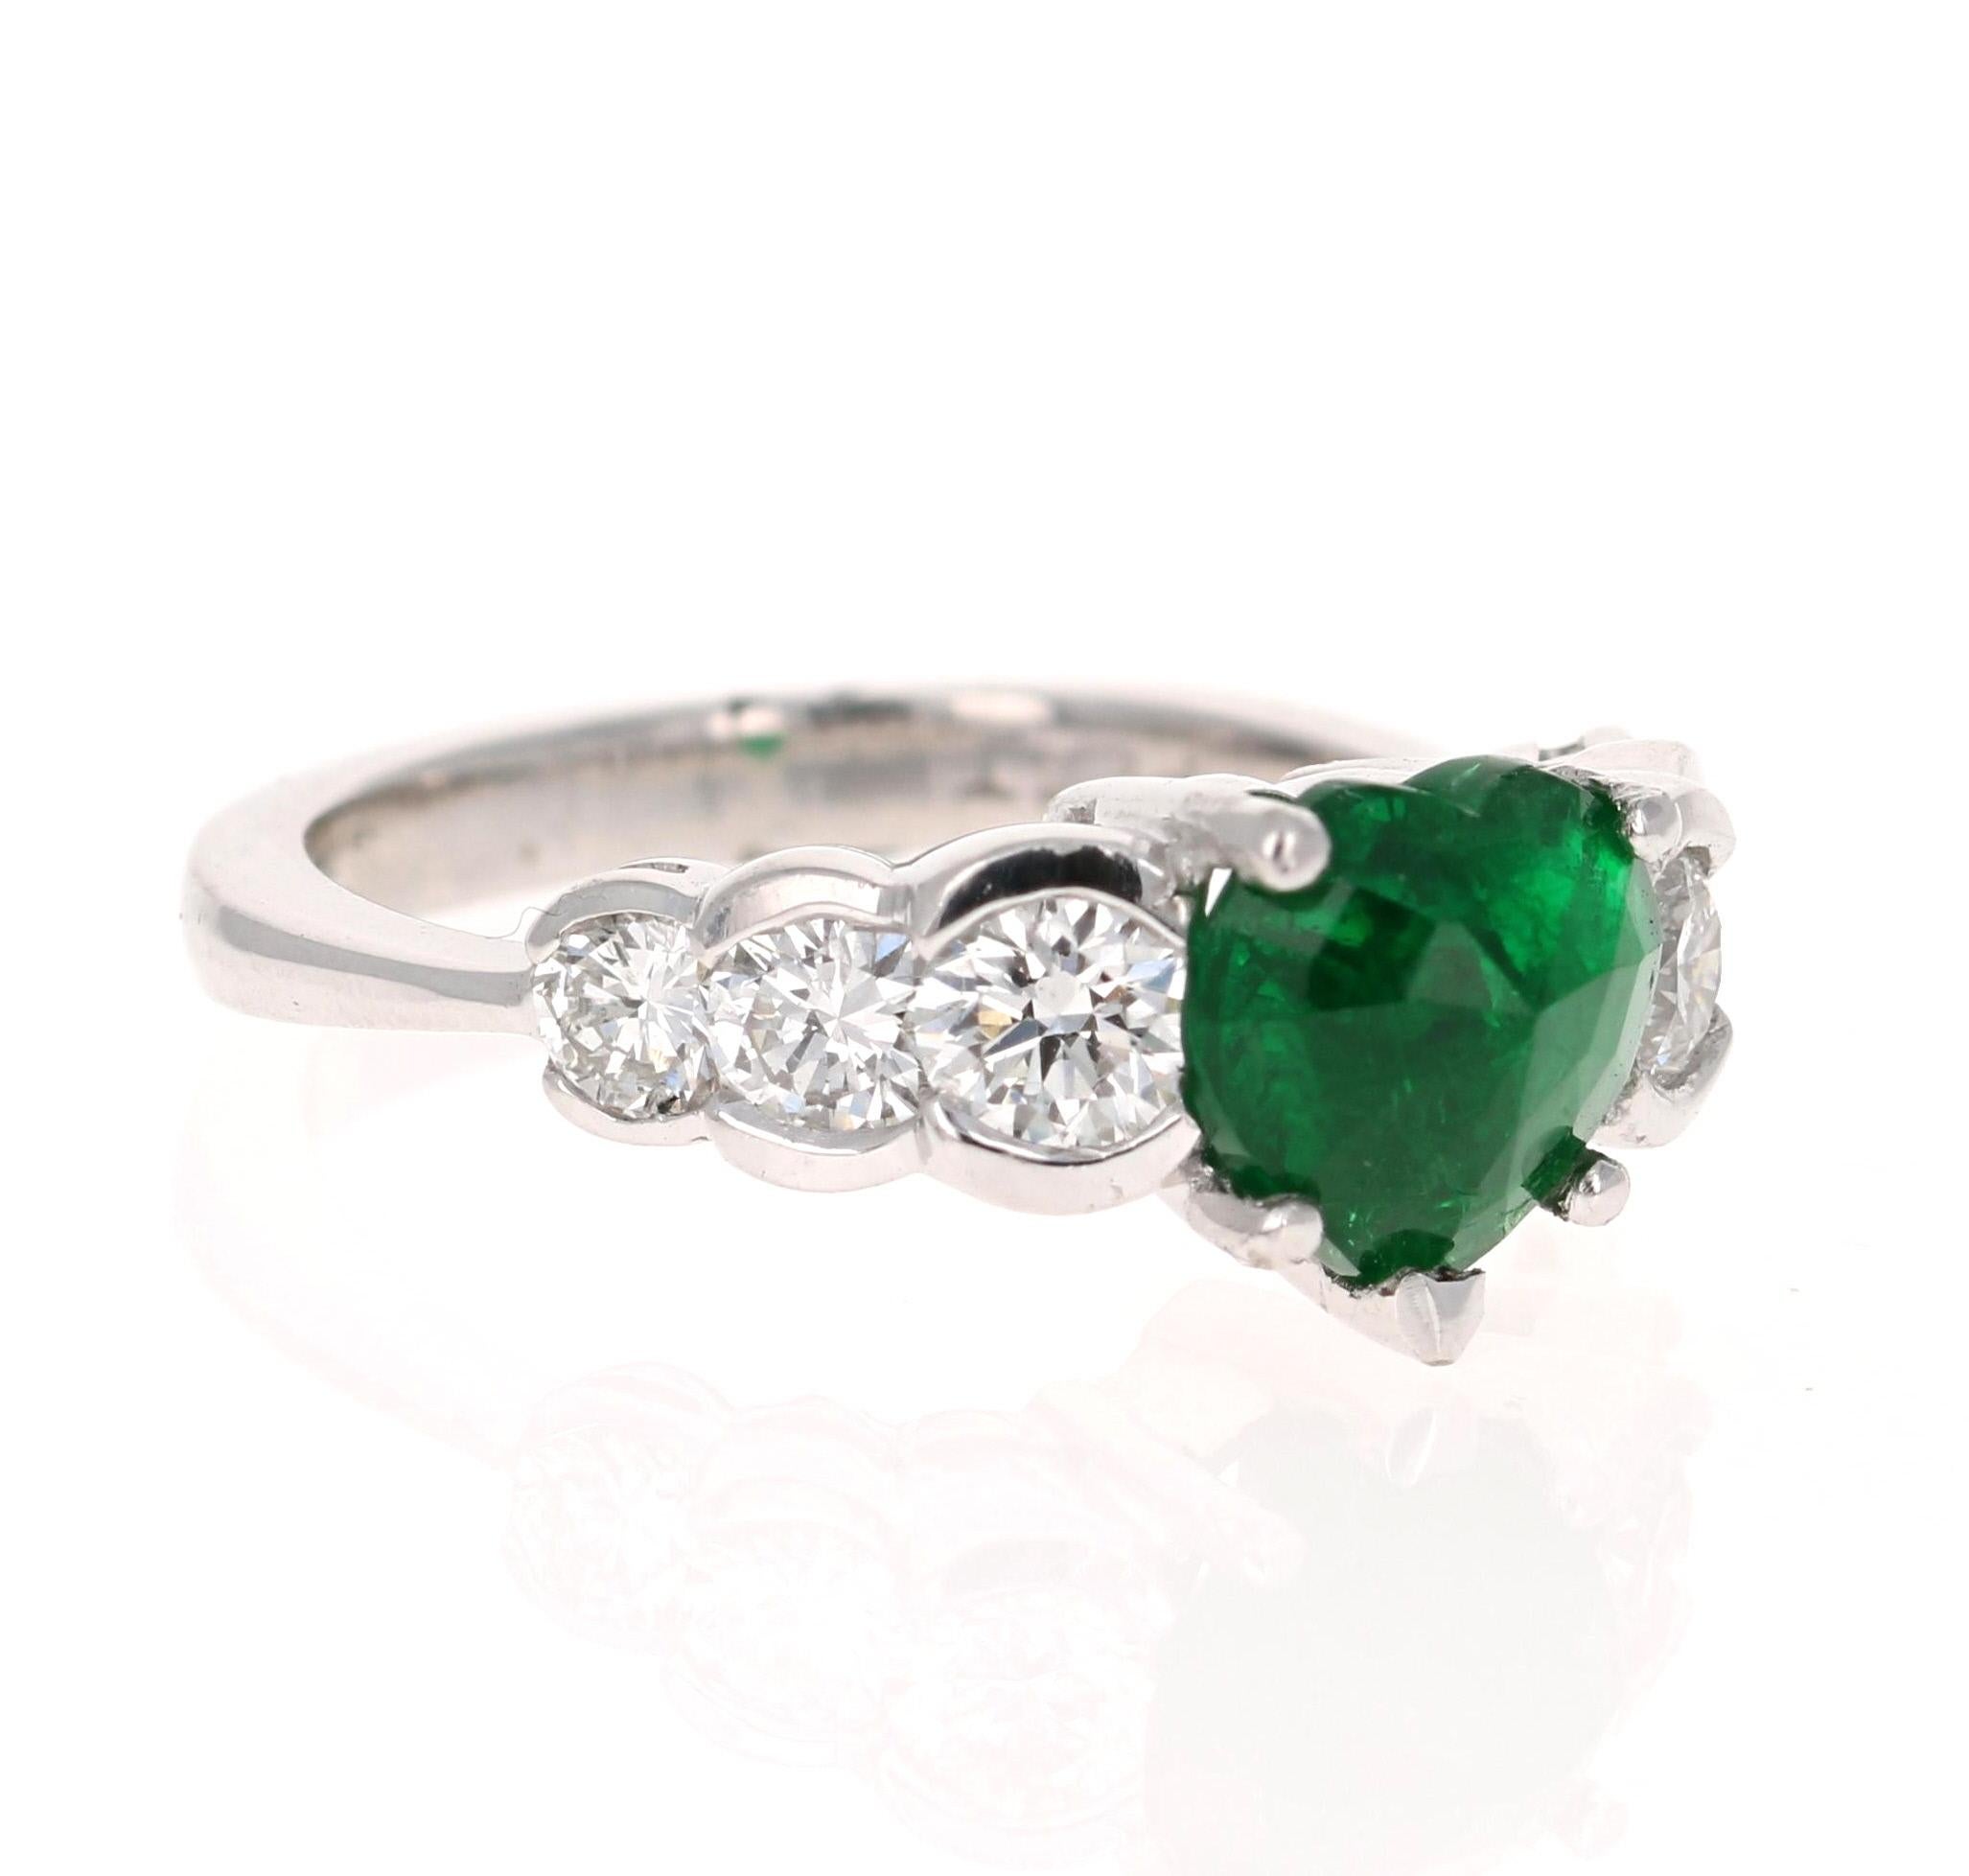 2.73 Carat Heart Cut Emerald Diamond Platinum Engagement Ring

Unique Hear Cut Emerald = 1.63 Carats.
6 Round Cut Diamonds = 1.10 Carats (Clarity: VS2, Color: F).
Platinum = 9.0 Grams.
Ring Size = 7 (Free ring sizing available upon request)